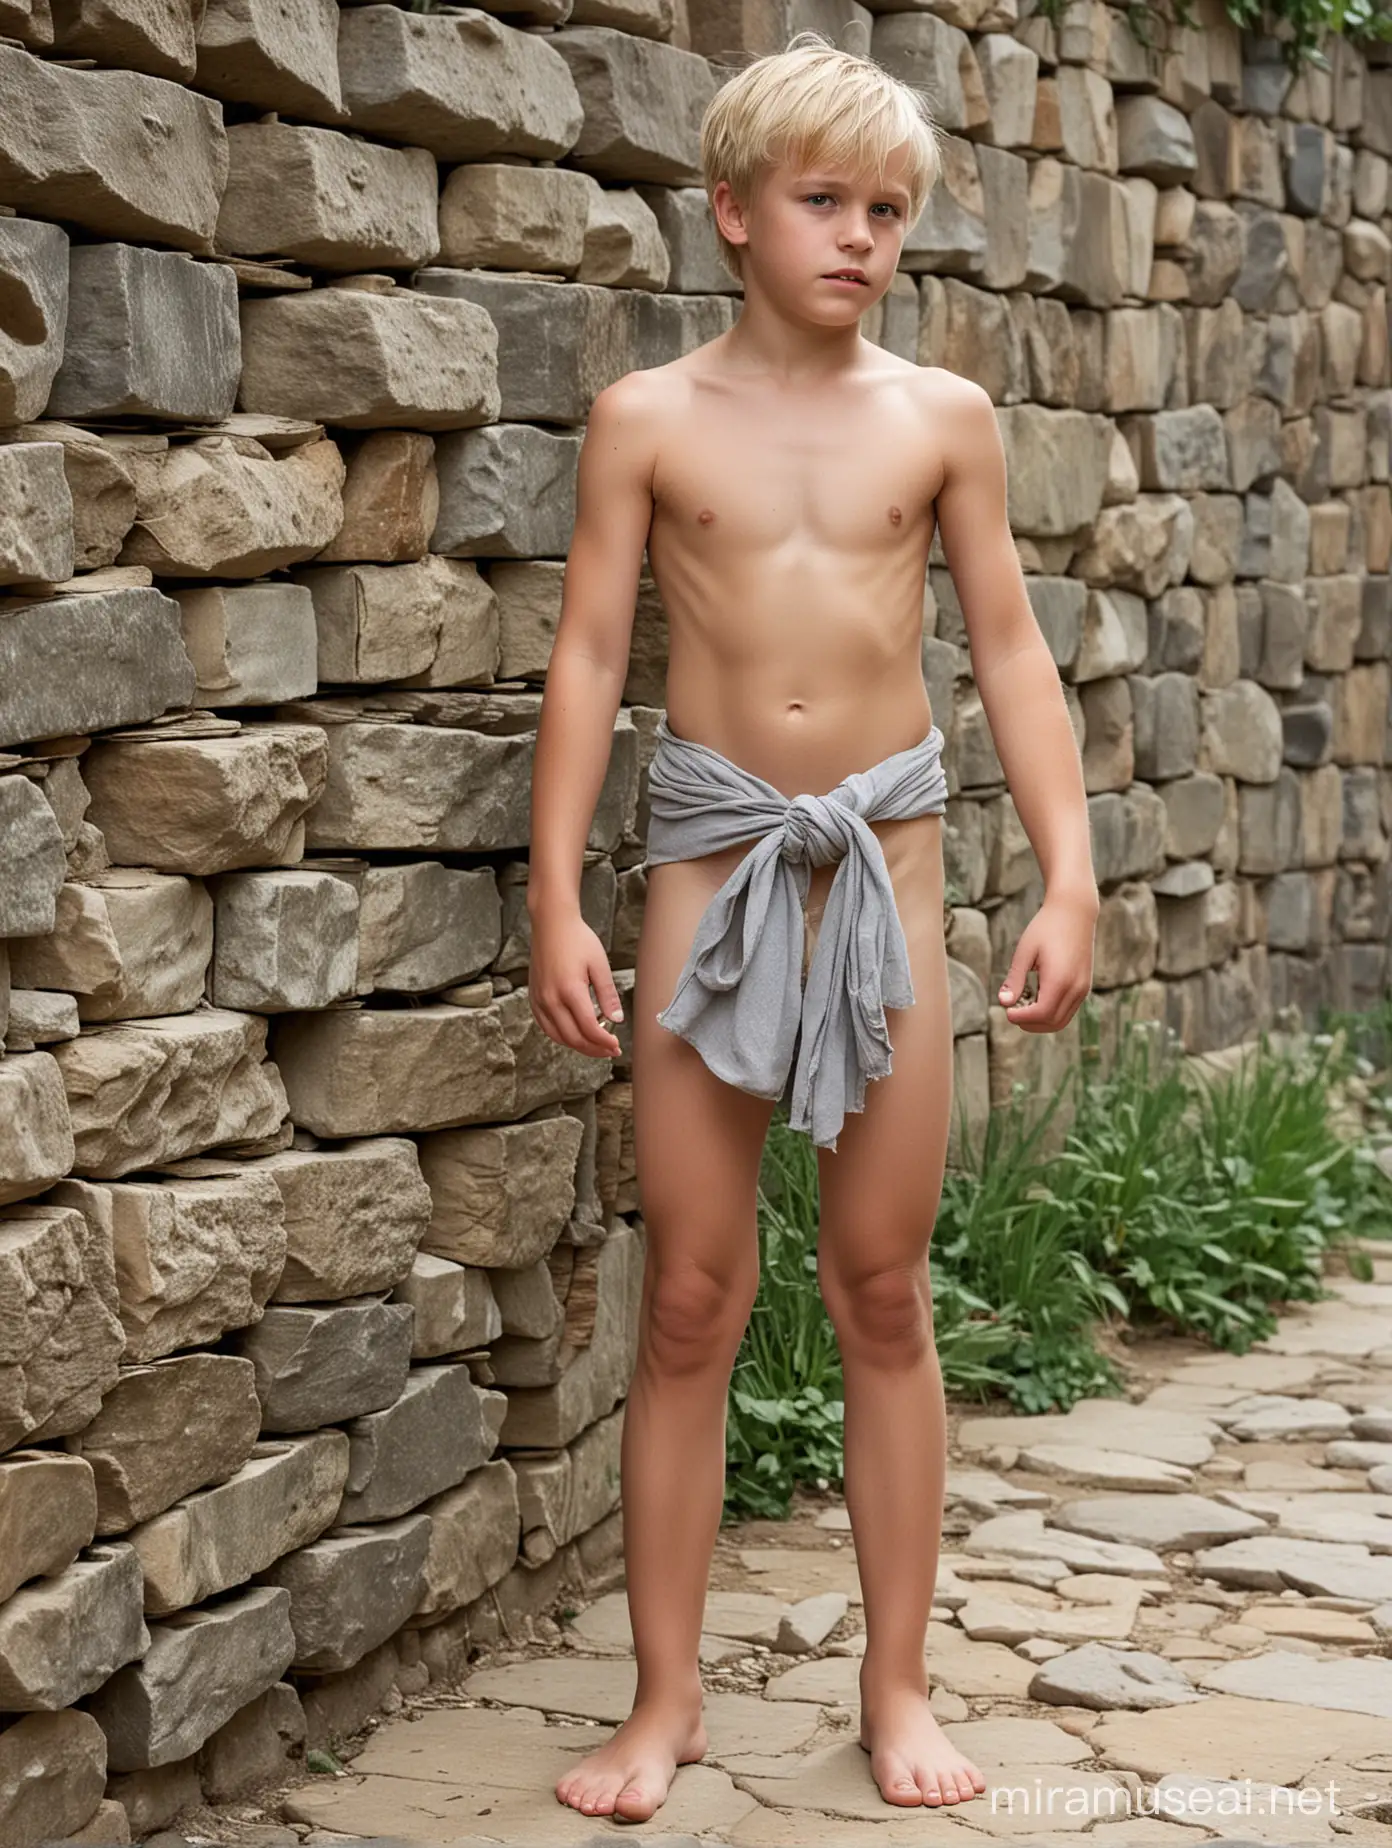 Blonde Slave Boy Standing Against a Stone Wall